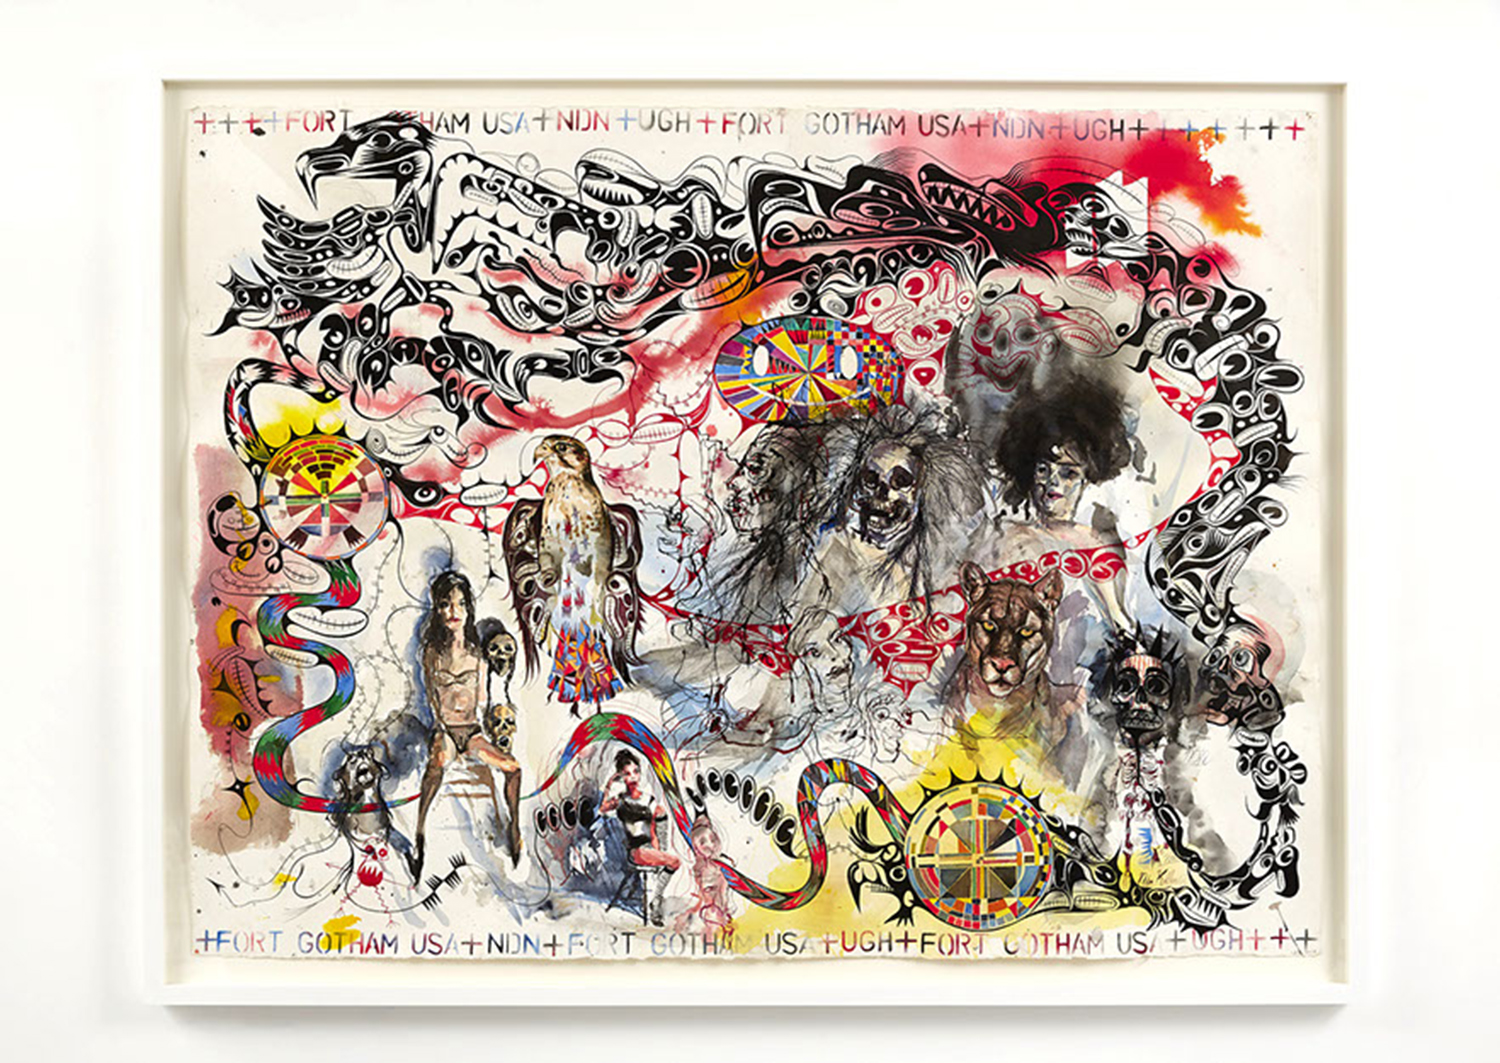 Brad Kahlhamer, “Fort Gotham USA+NON+UGH,” 45” x 59 ¾” x 64 ½”, framed, watercolor, ink and spray paint on paper, 2013.